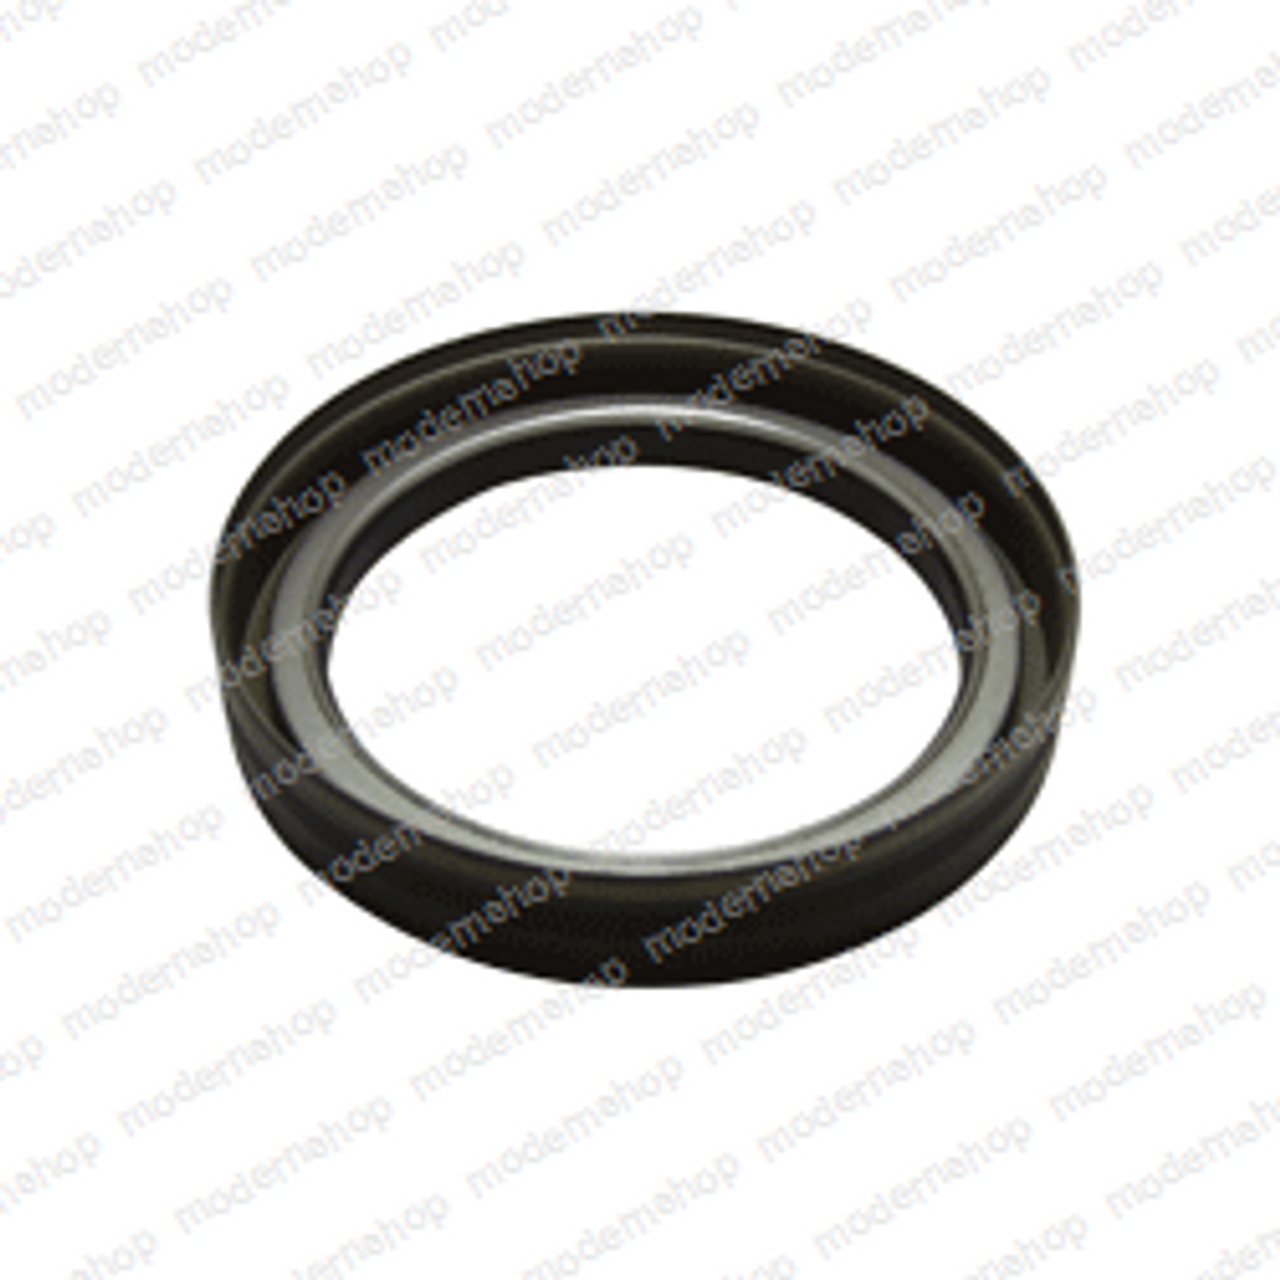 3810-604: Tailift Forklift SEAL - OIL